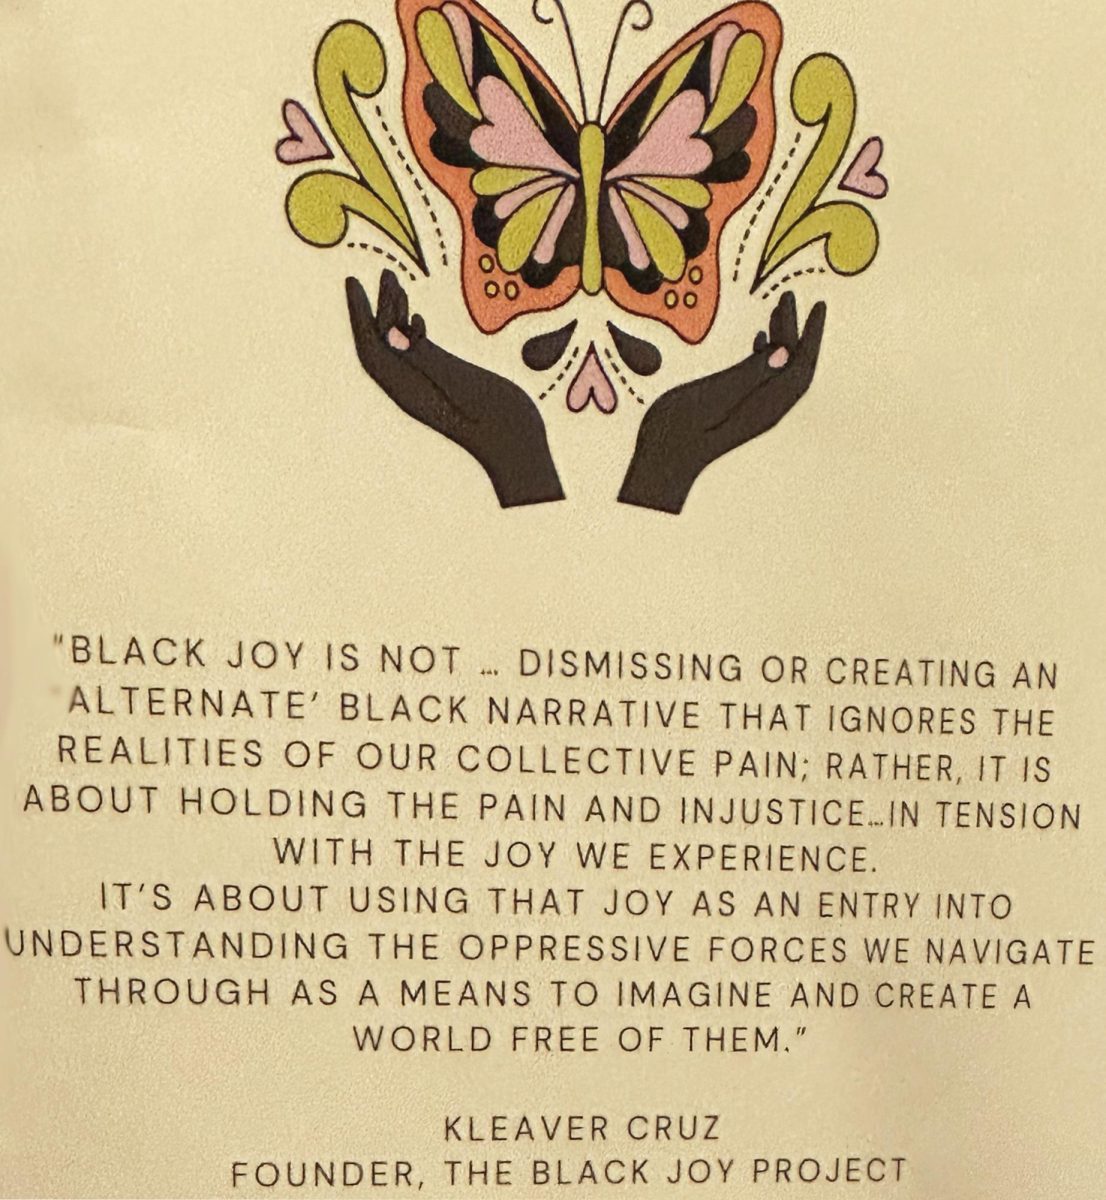 Black Joy Exhibit was on display from Feb. 26 until March 1.